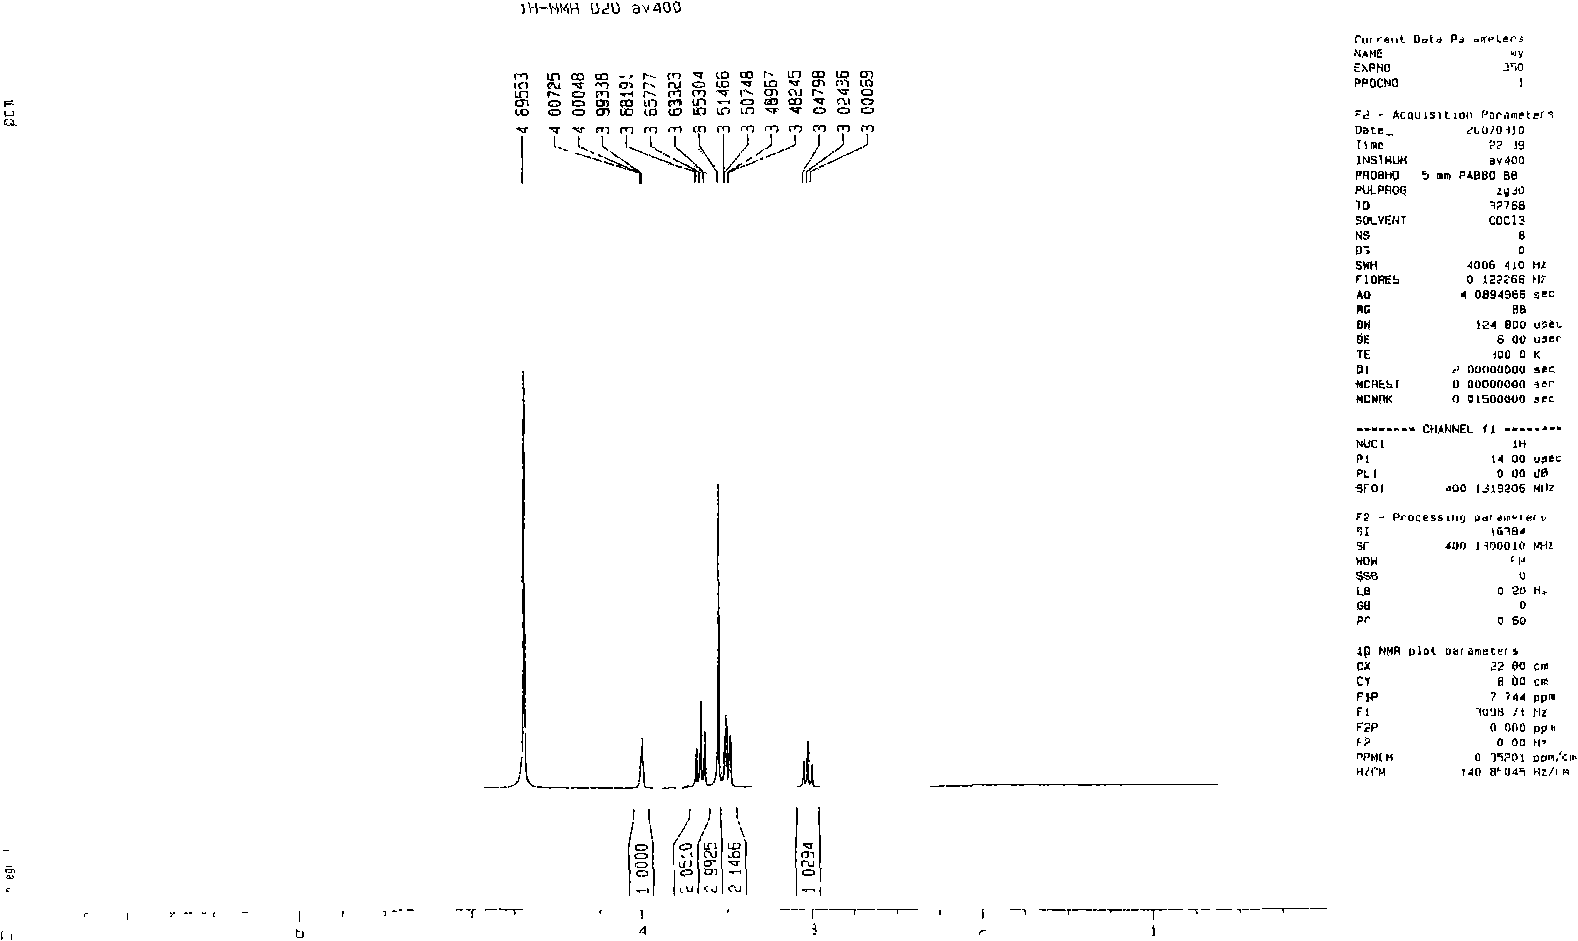 Method for obtaining extract from several frequently seen plants and uses of the extract